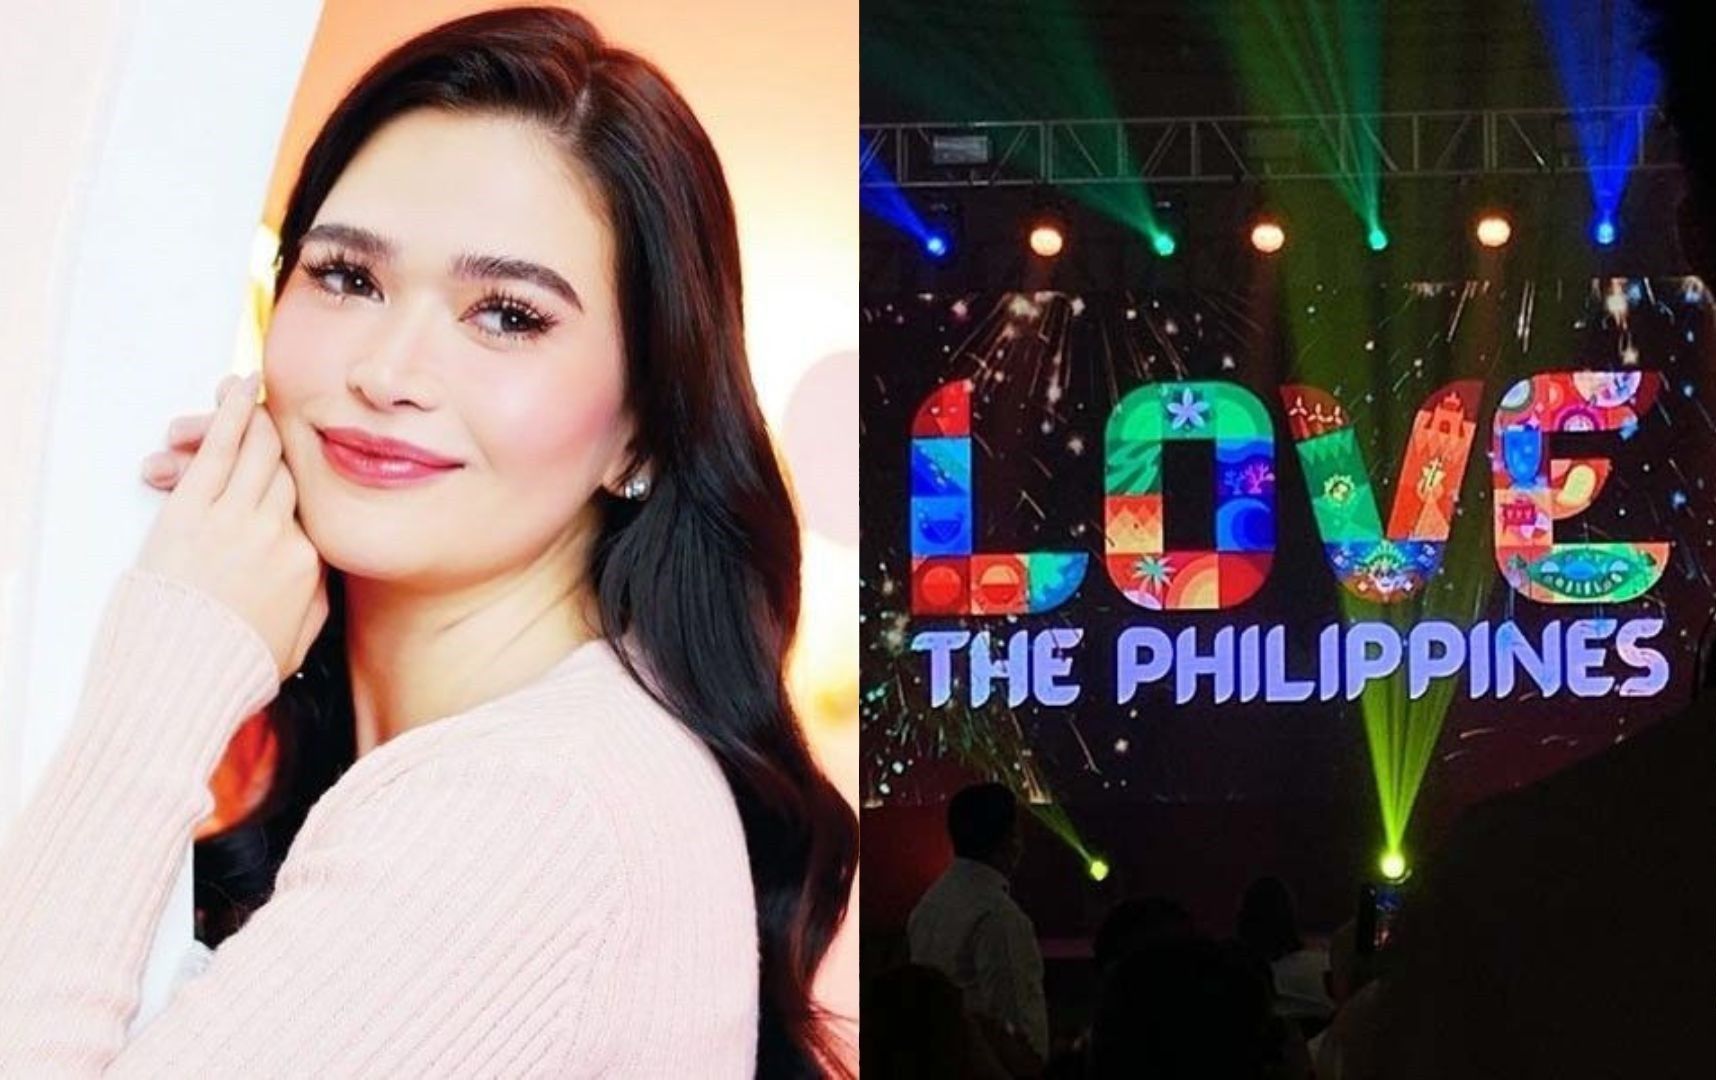 Bela Padilla opens up about struggling with acne breakouts due to PCOS